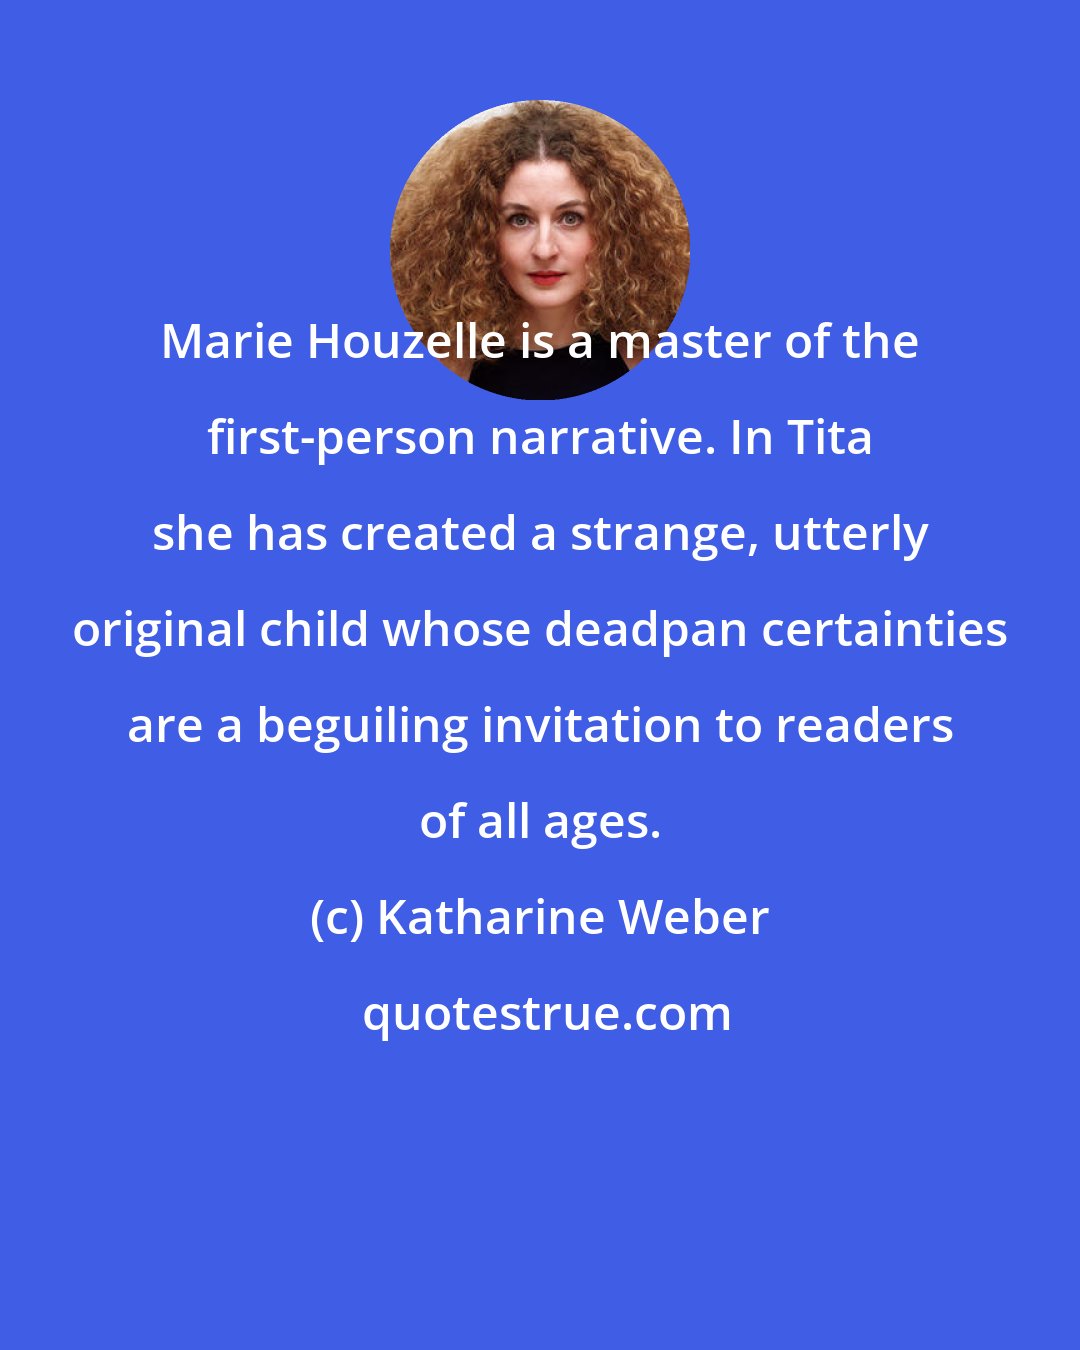 Katharine Weber: Marie Houzelle is a master of the first-person narrative. In Tita she has created a strange, utterly original child whose deadpan certainties are a beguiling invitation to readers of all ages.